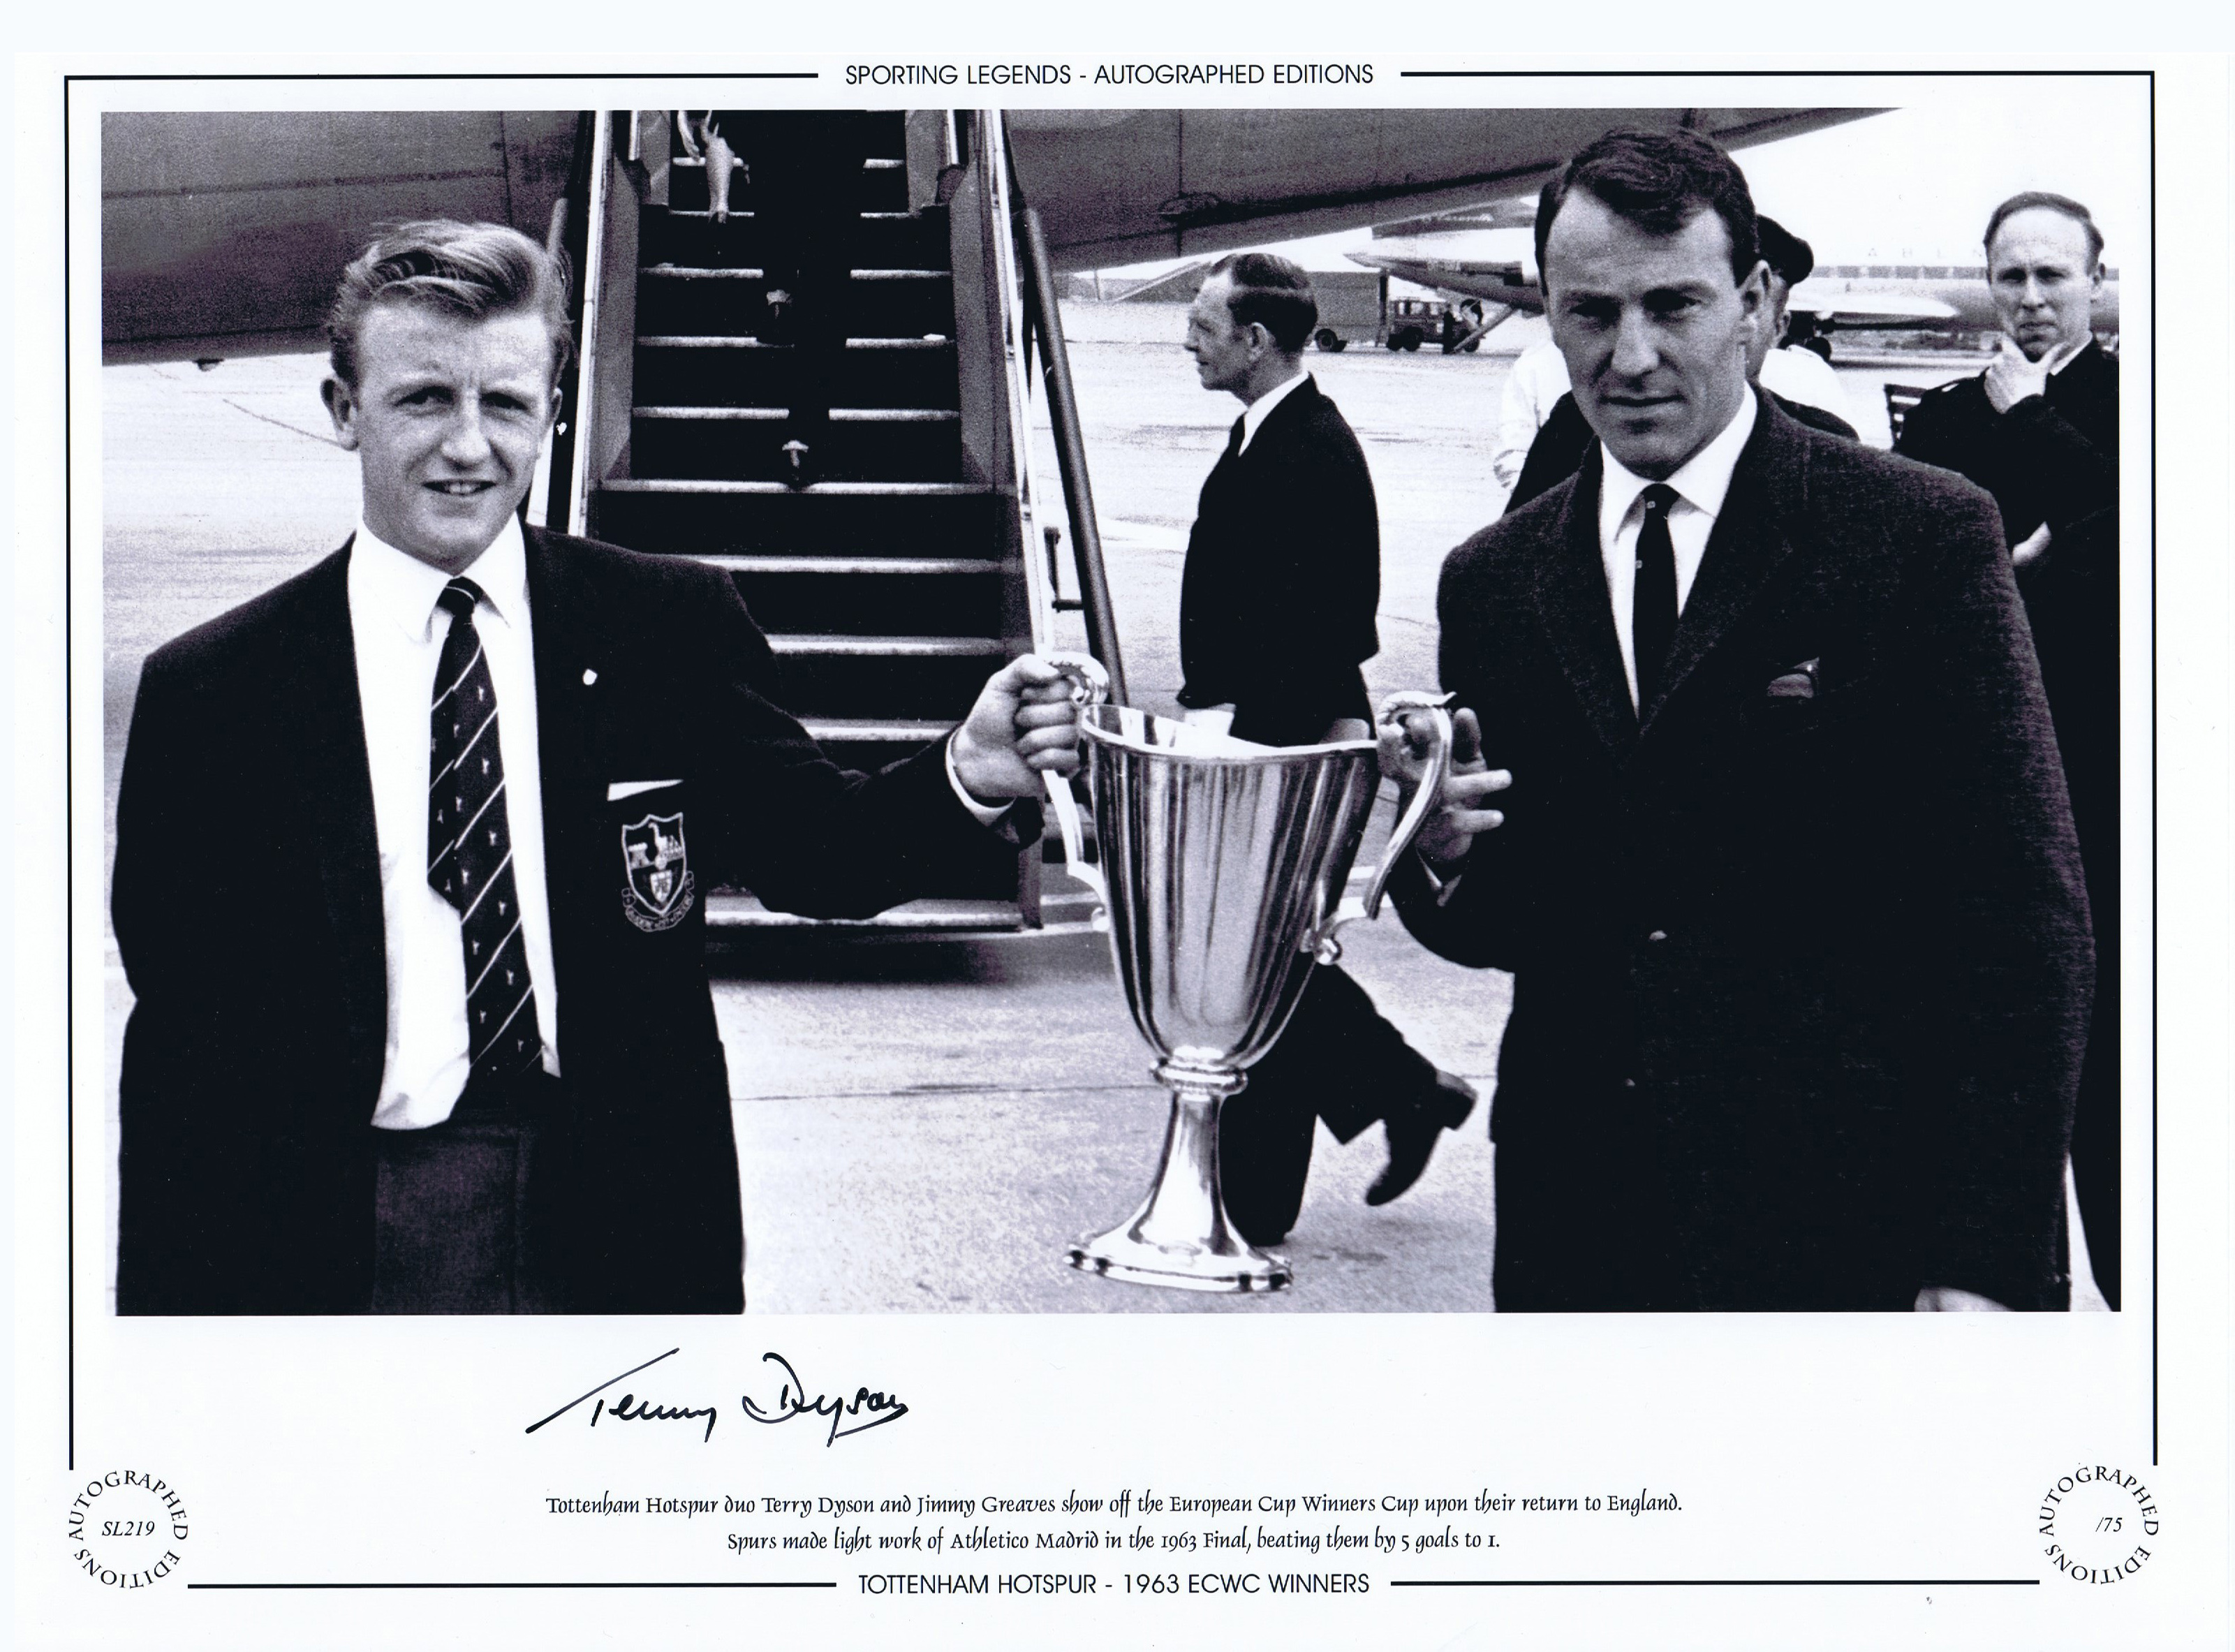 Autographed Terry Dyson 16 X 12 Limited-Edition, B/W, Depicting Tottenham's Terry Dyson And Jimmy